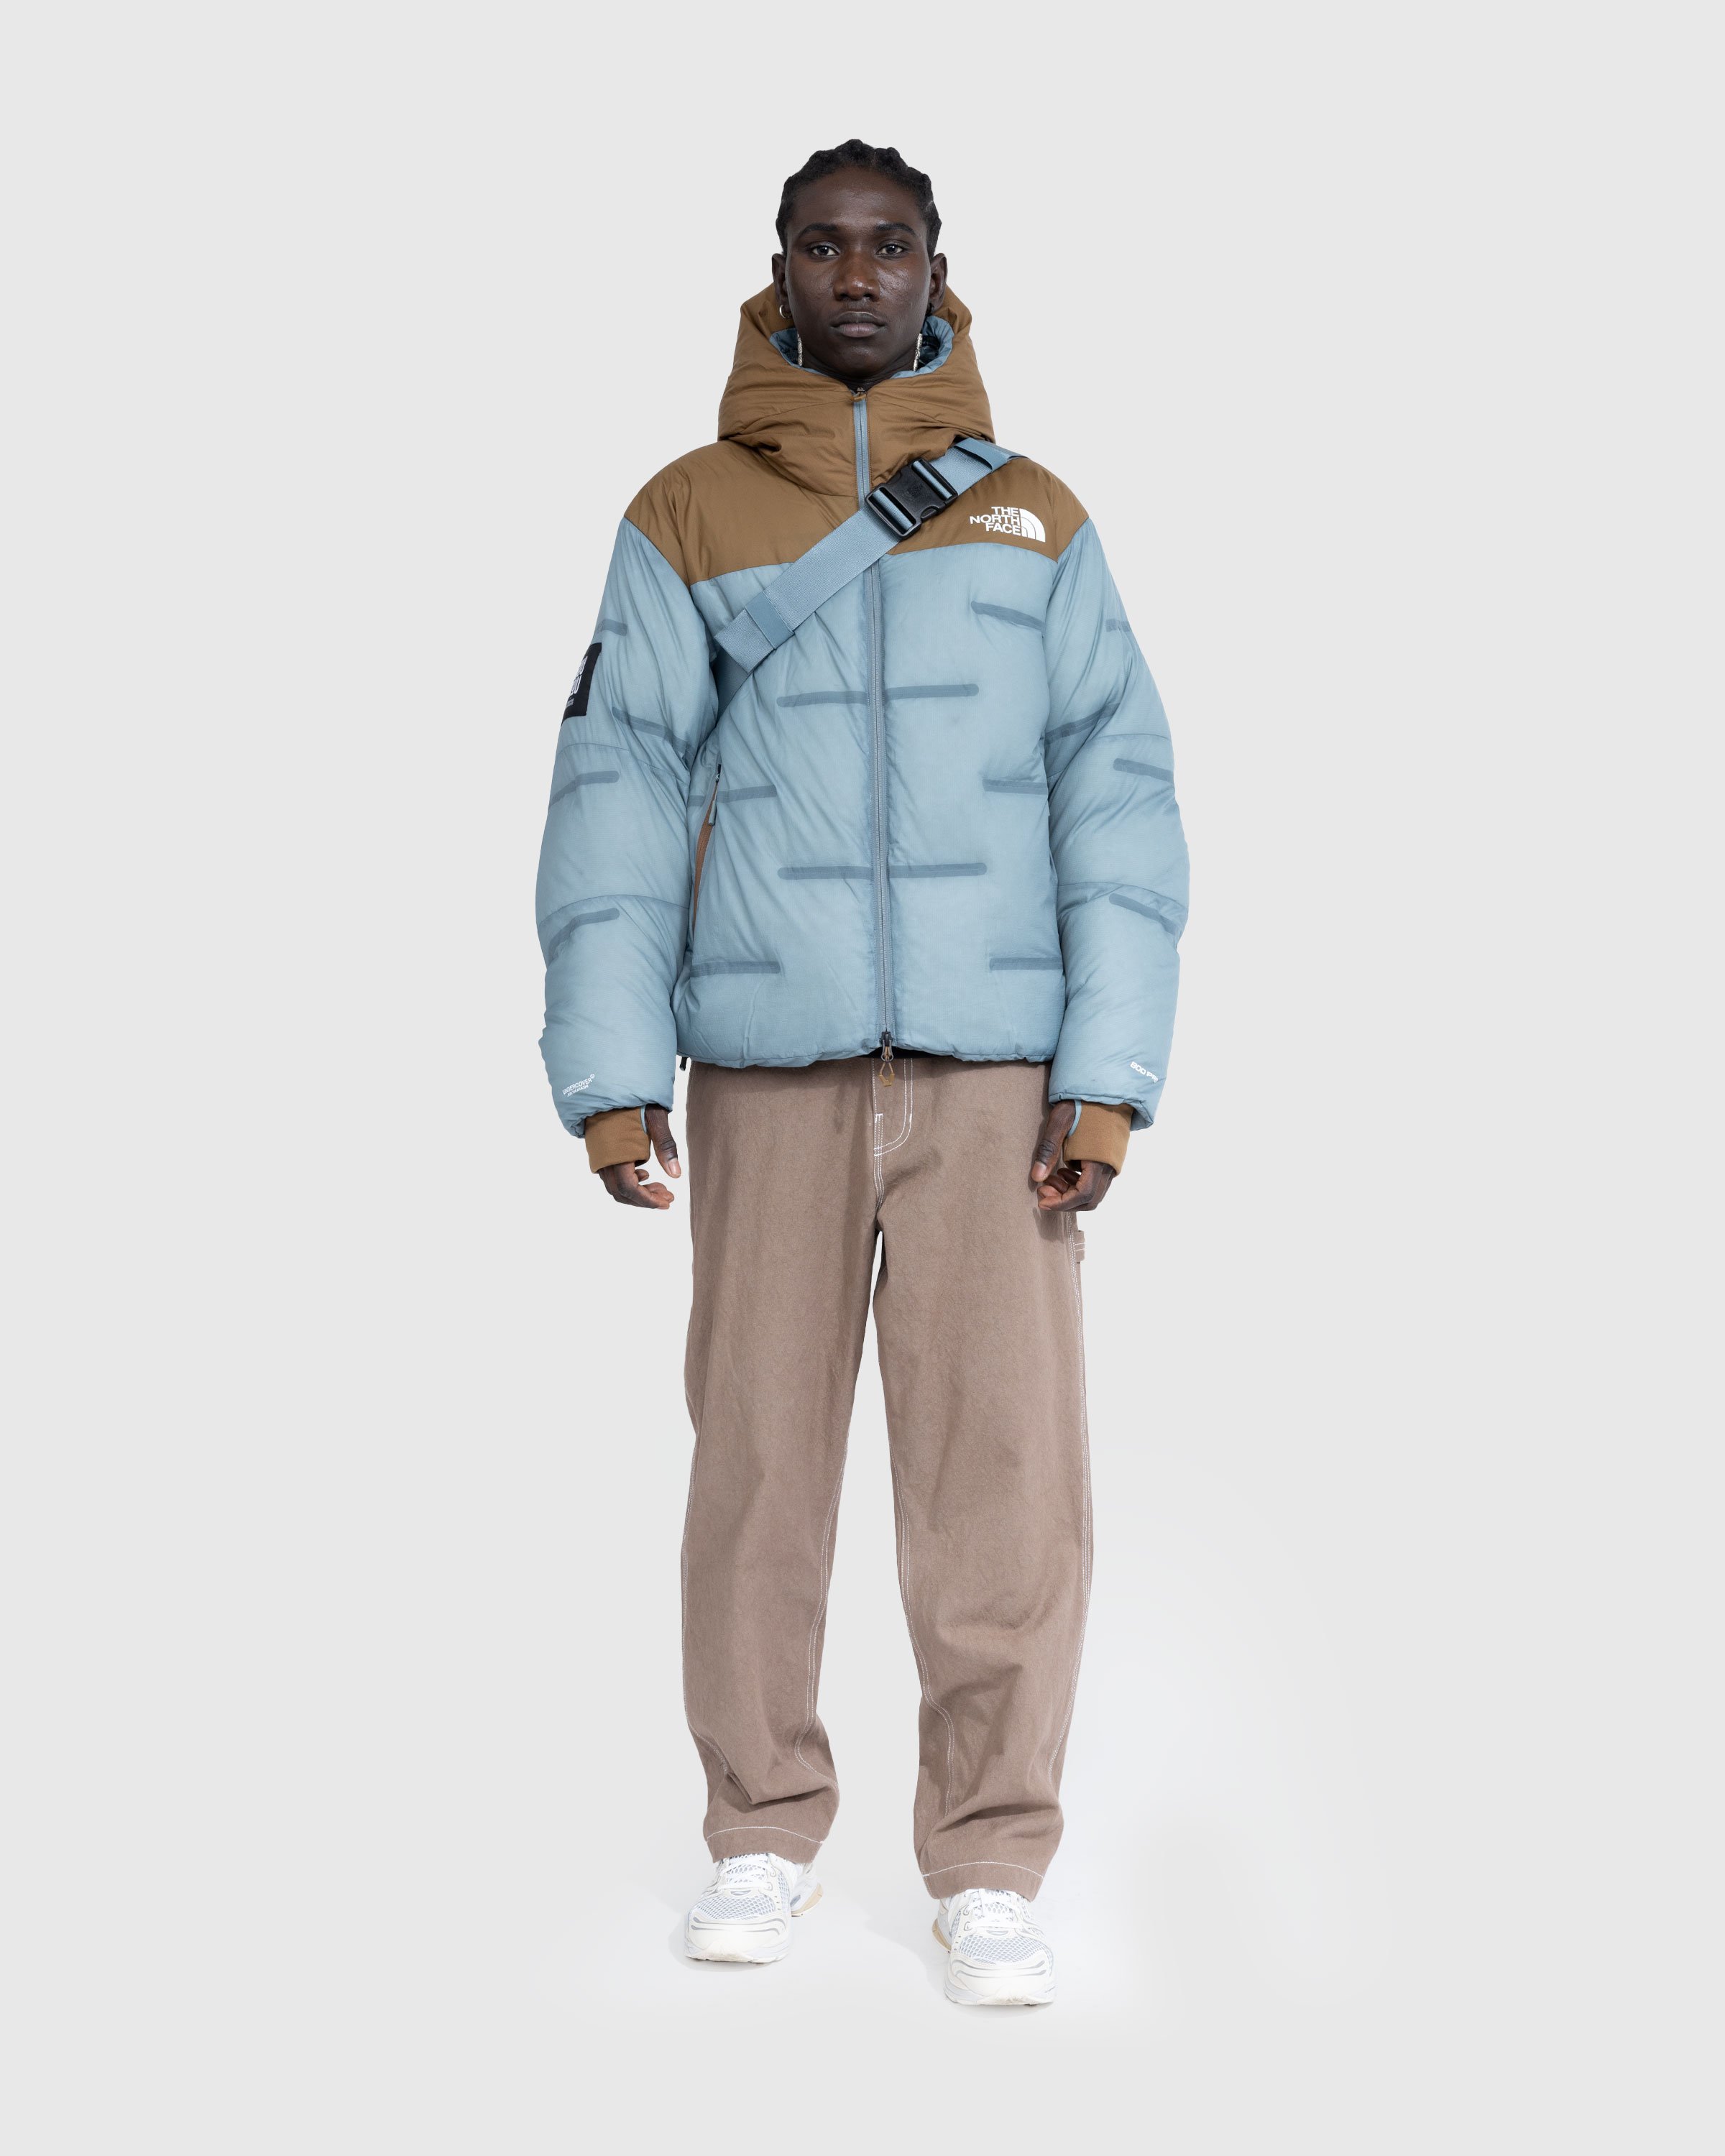 The North Face x UNDERCOVER - Soukuu Cloud Down Nupste Sepia Brown/Concrete Gray - Clothing - Multi - Image 5